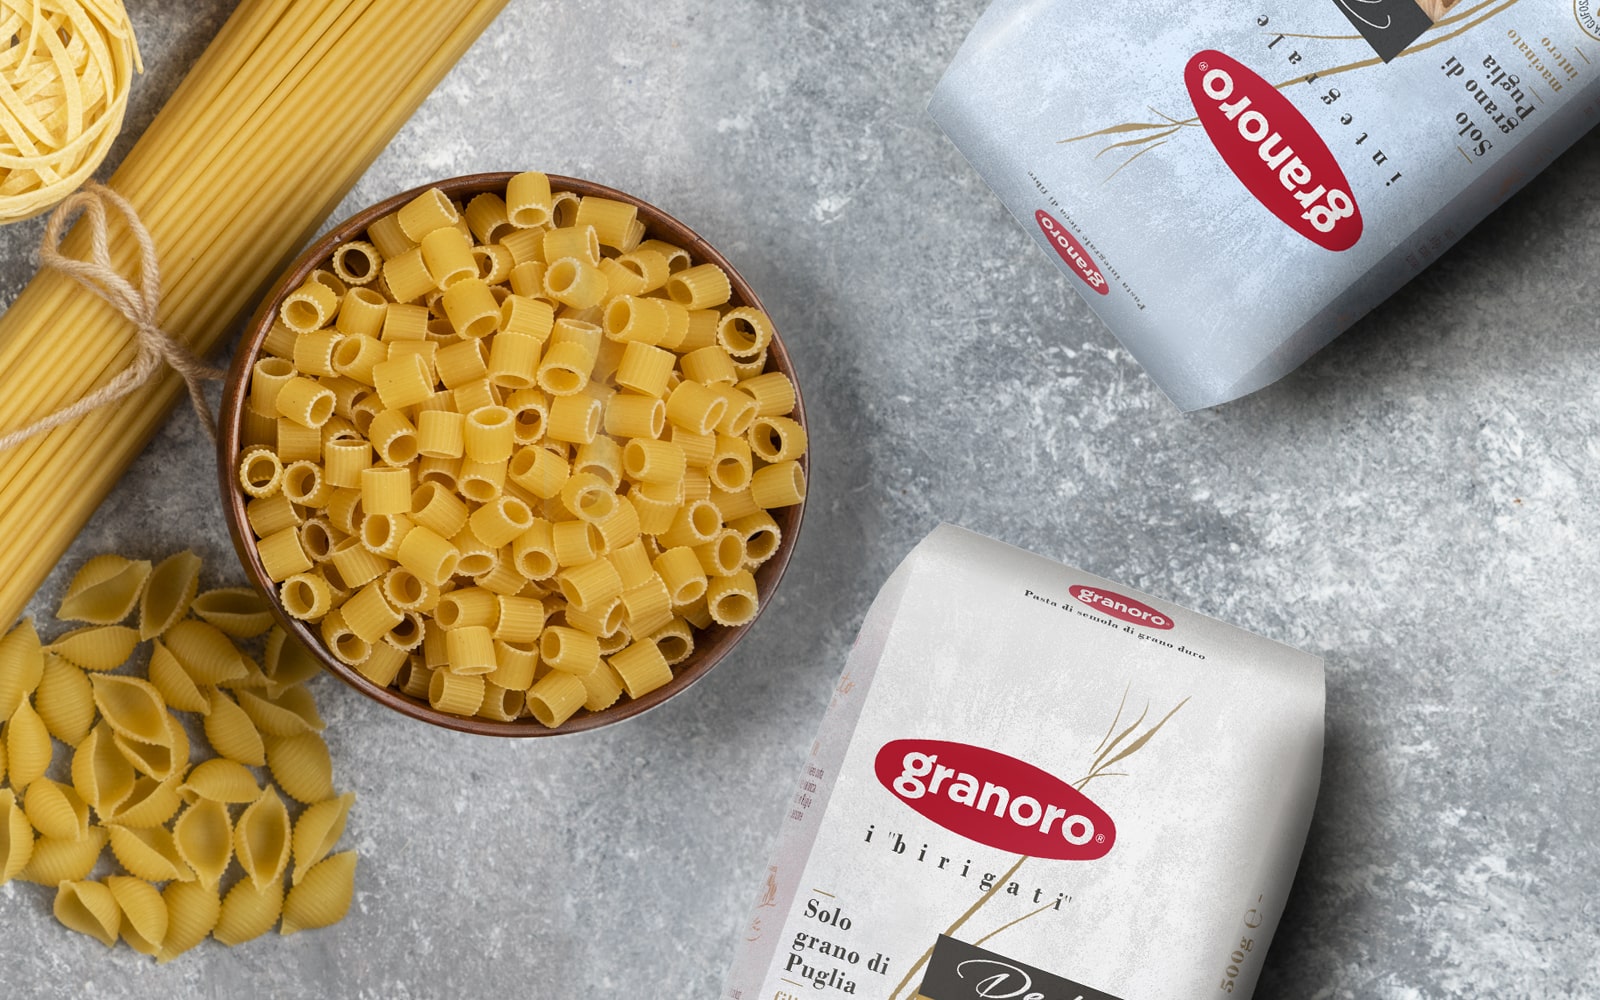 https://shop.granoro.it/images/images-categories/Pasta-min.jpg